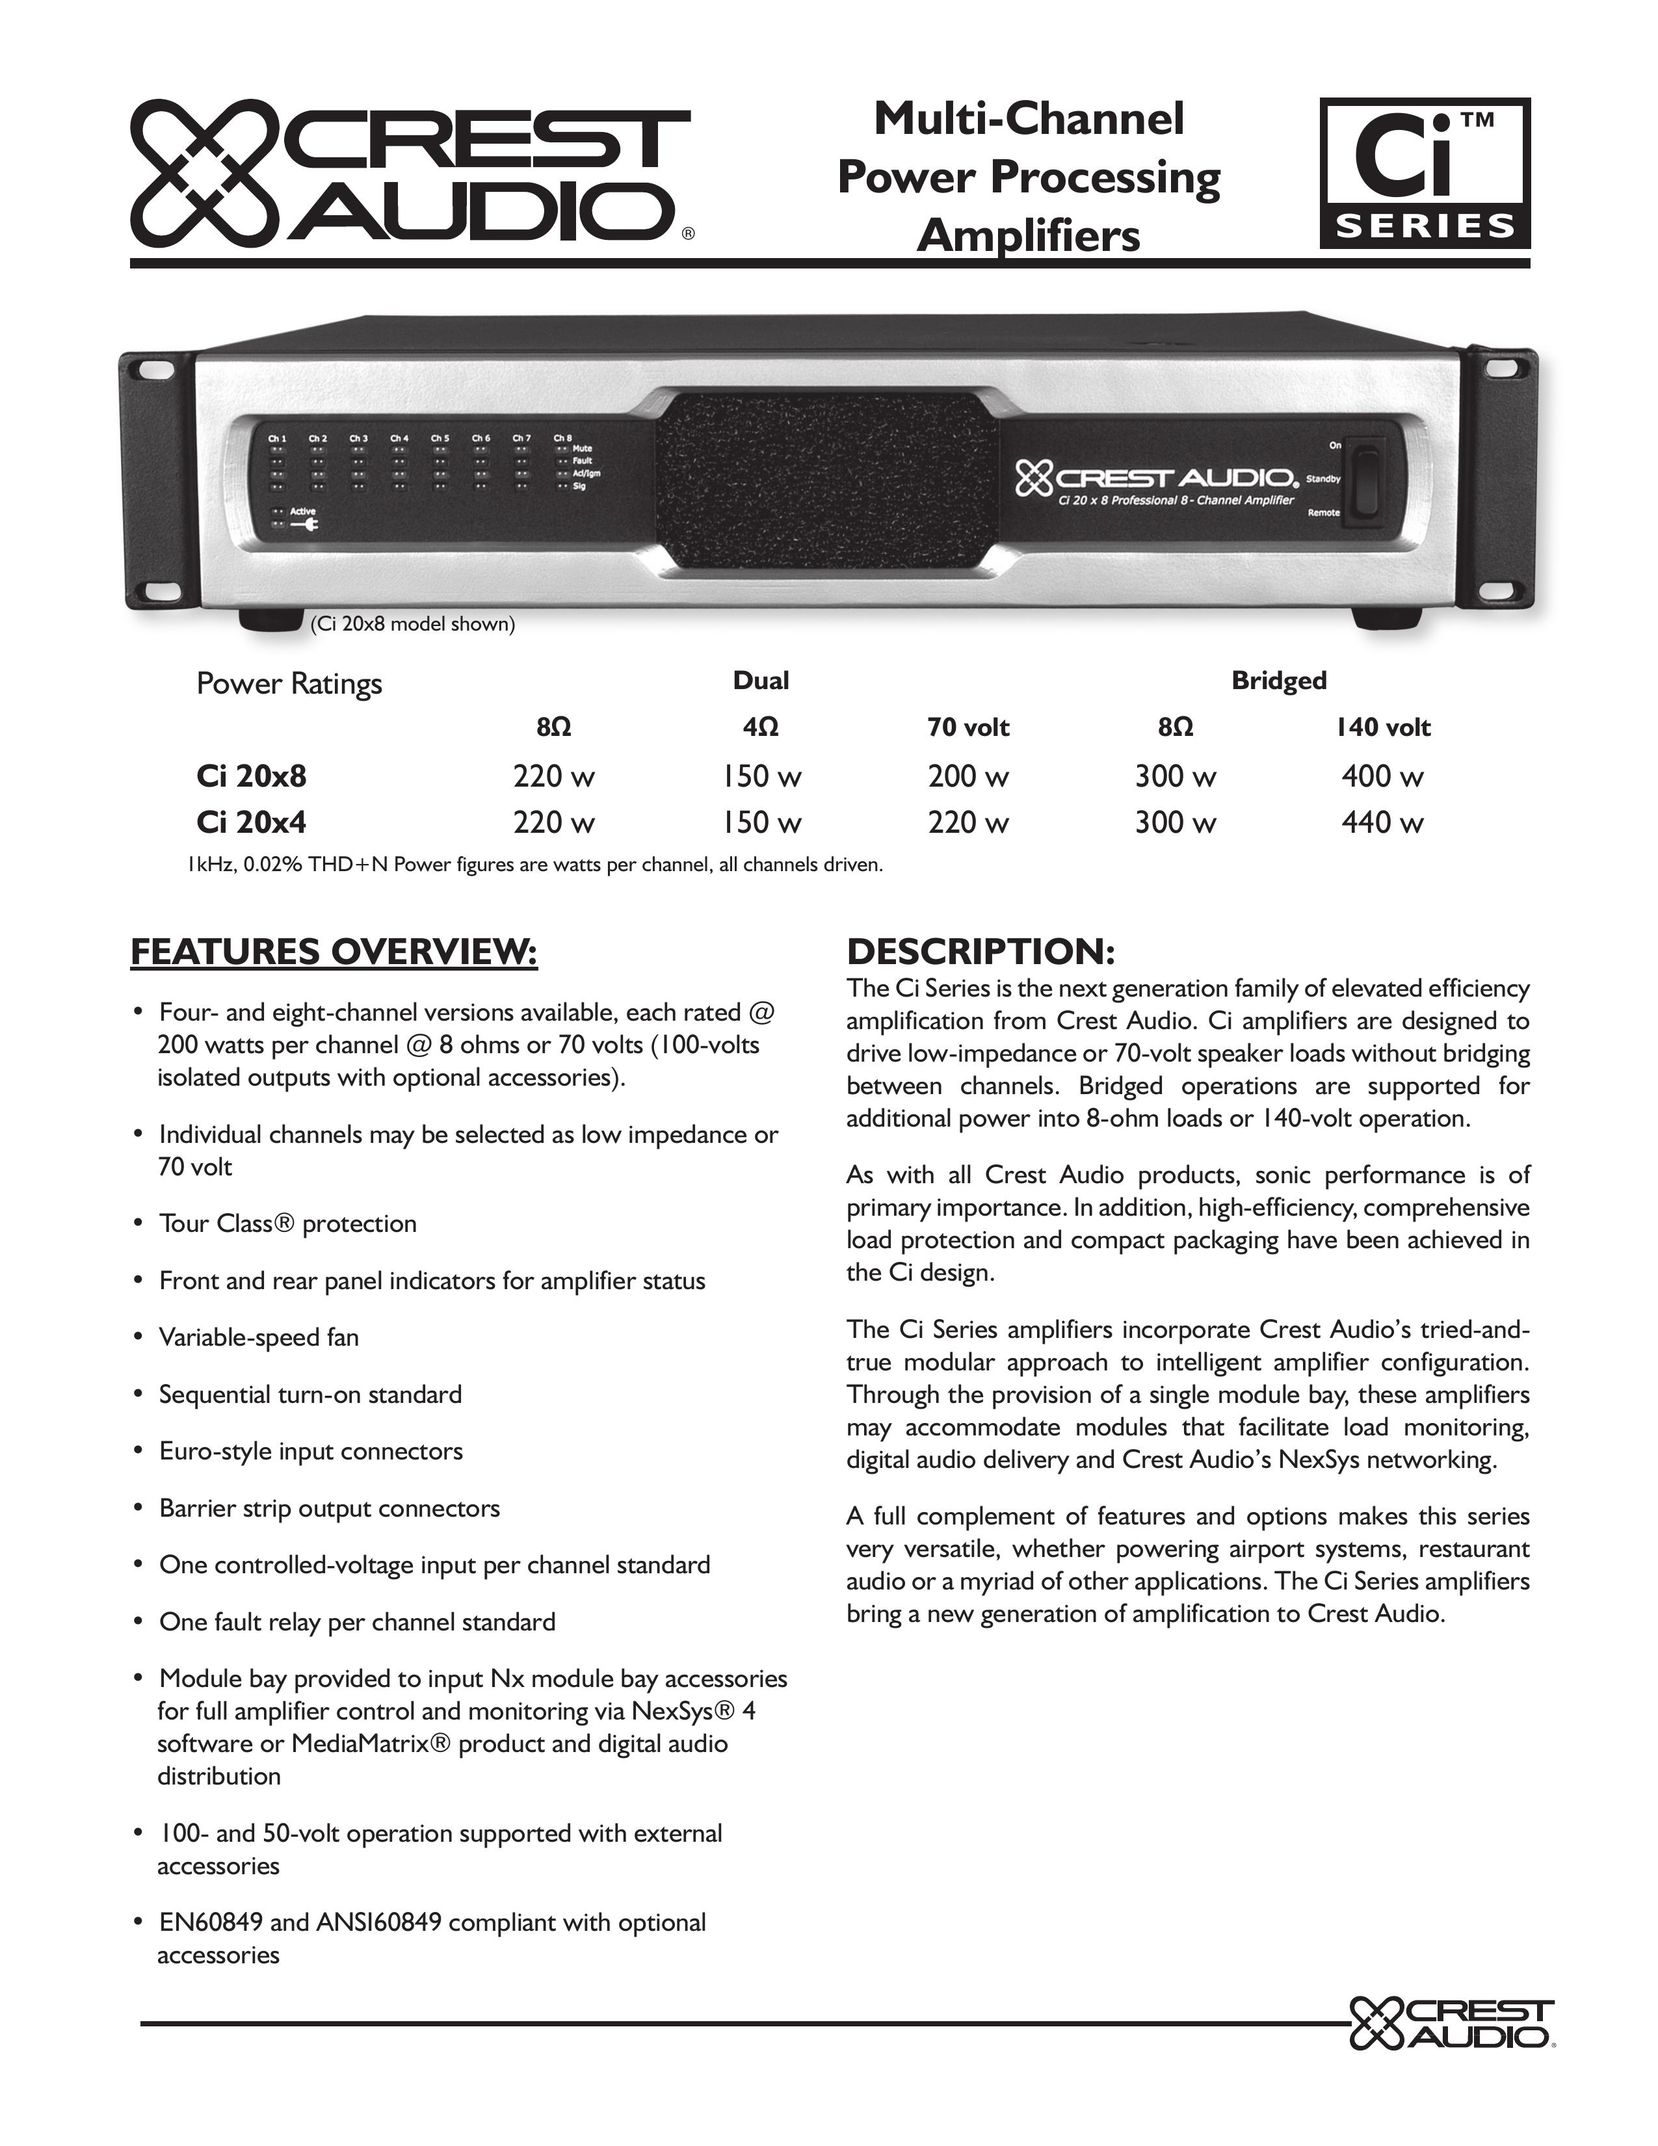 Crest Audio Ci 20 X 8 Stereo Amplifier User Manual